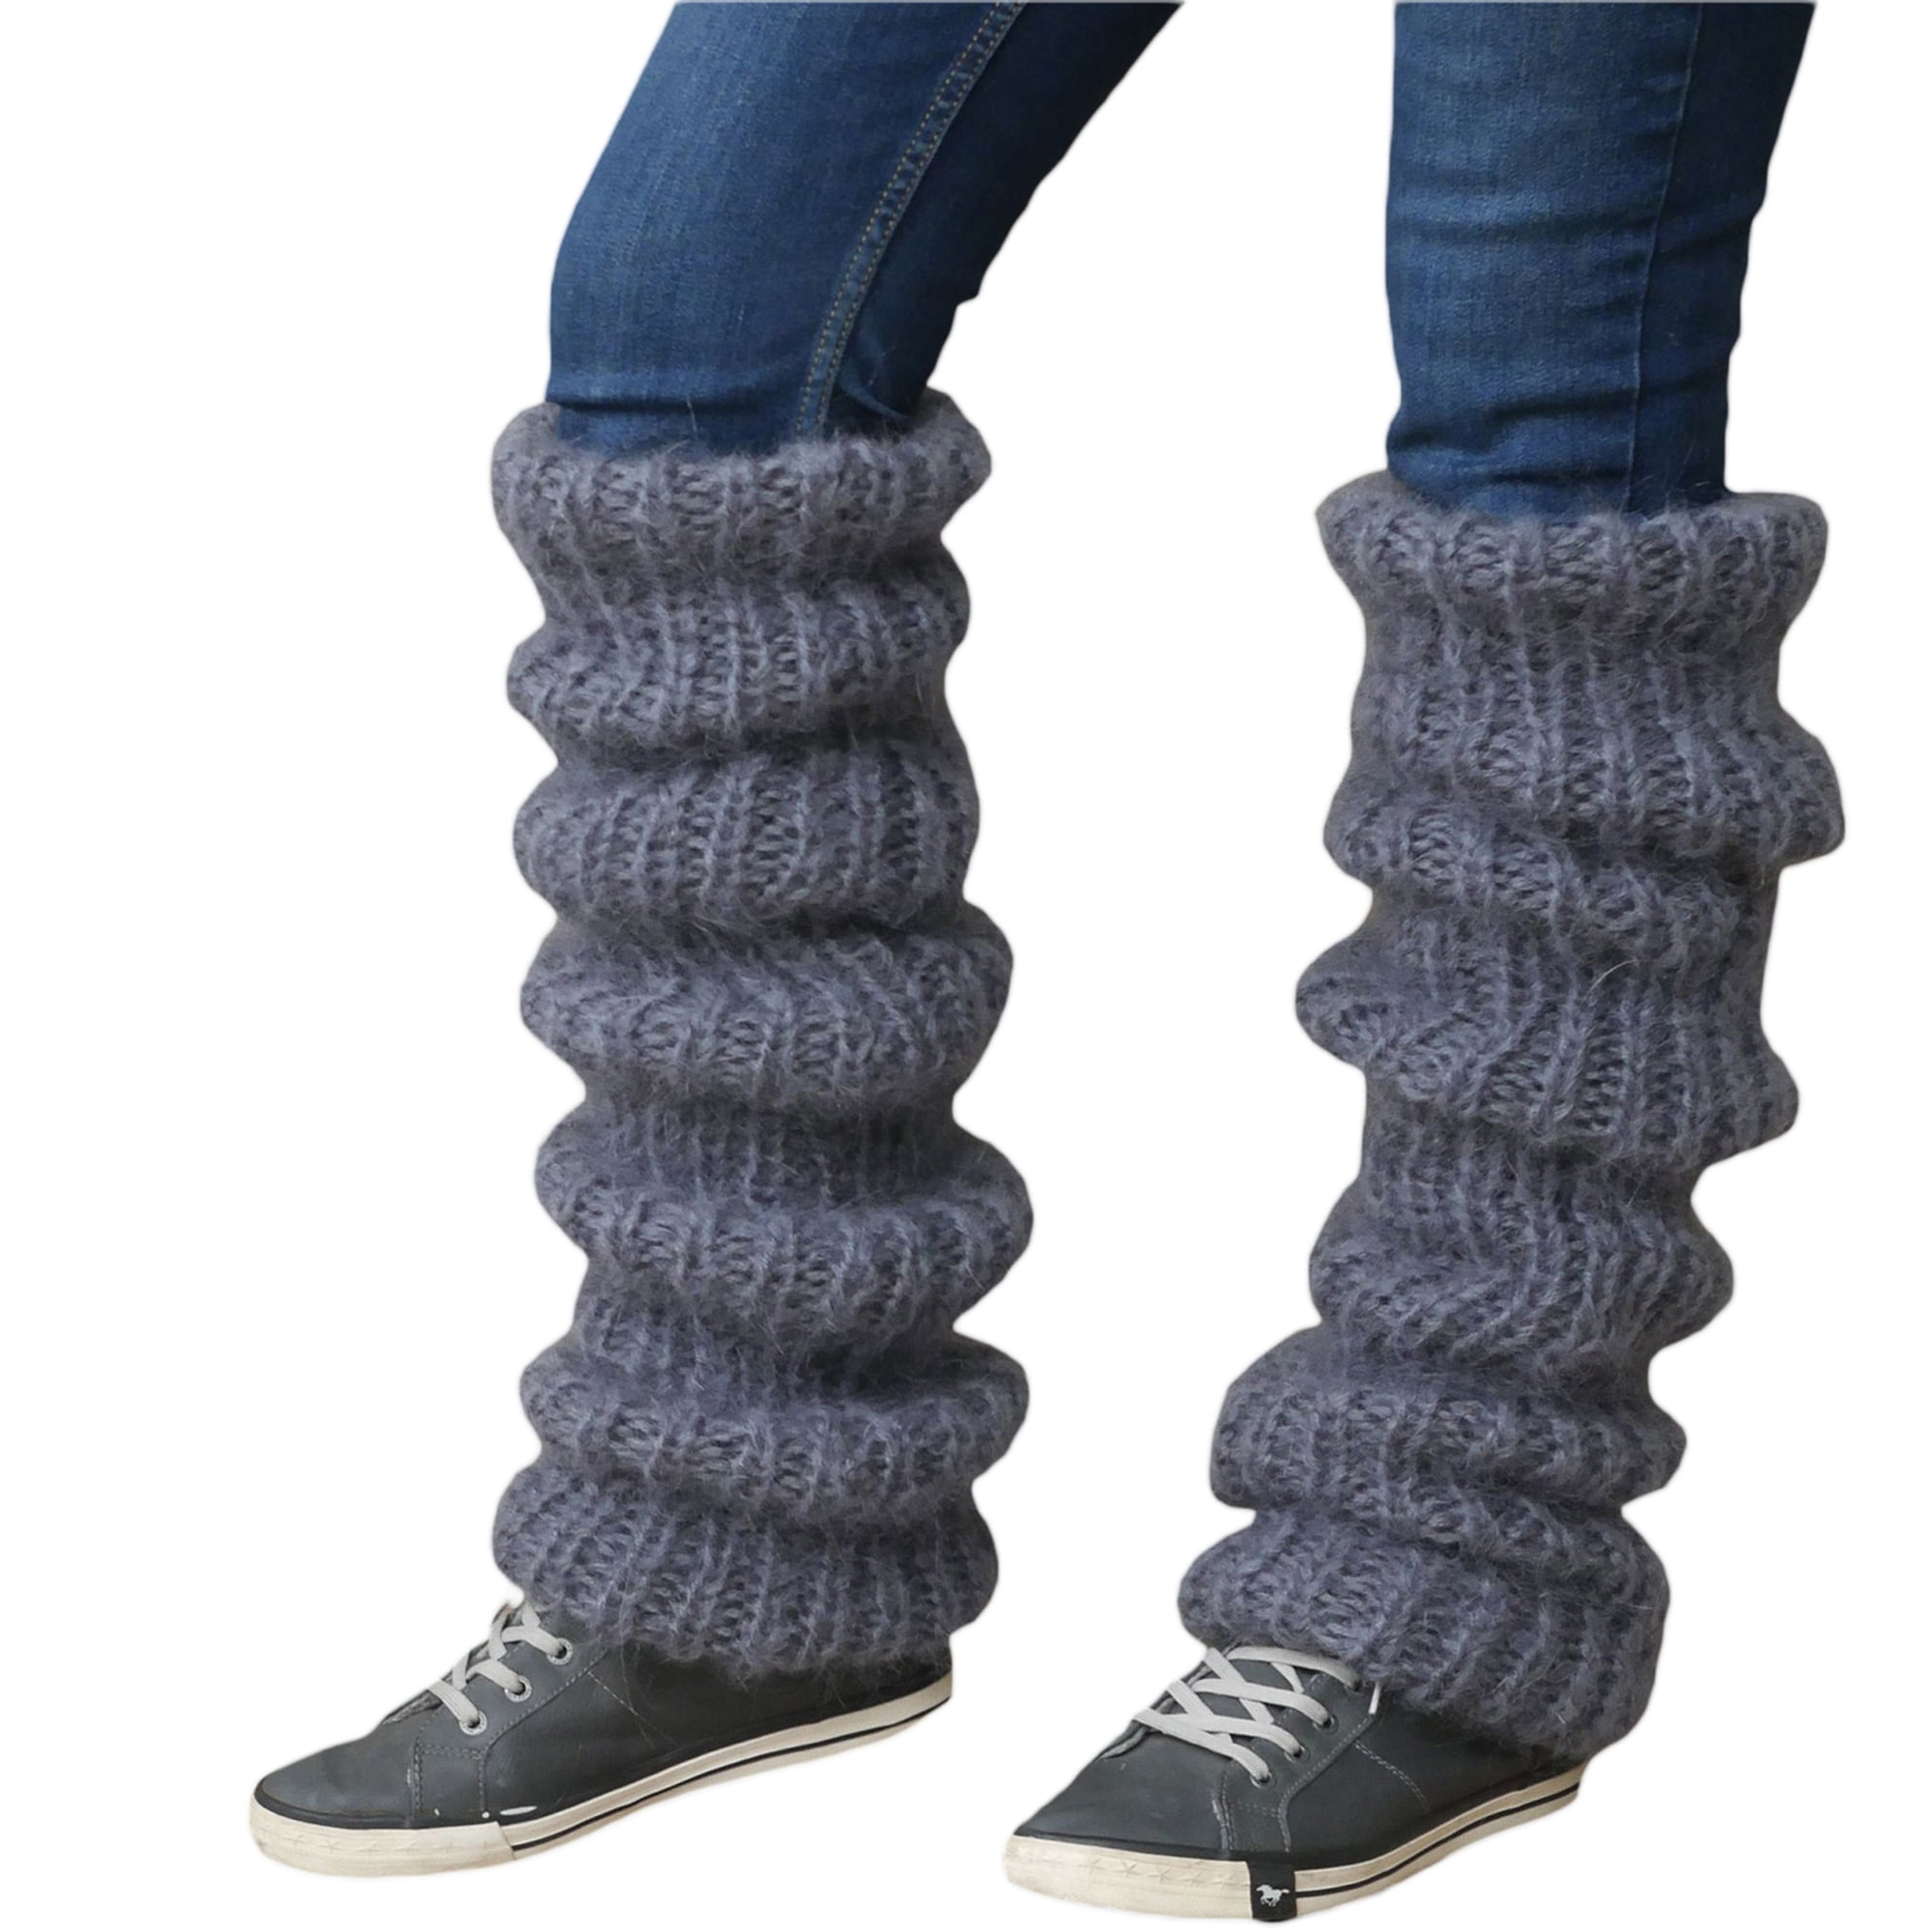 Leg Warmers for Women 80s Ribbed Knitted Leg Warmers Sports Dance Yoga  Halloween Party Costume Accessories